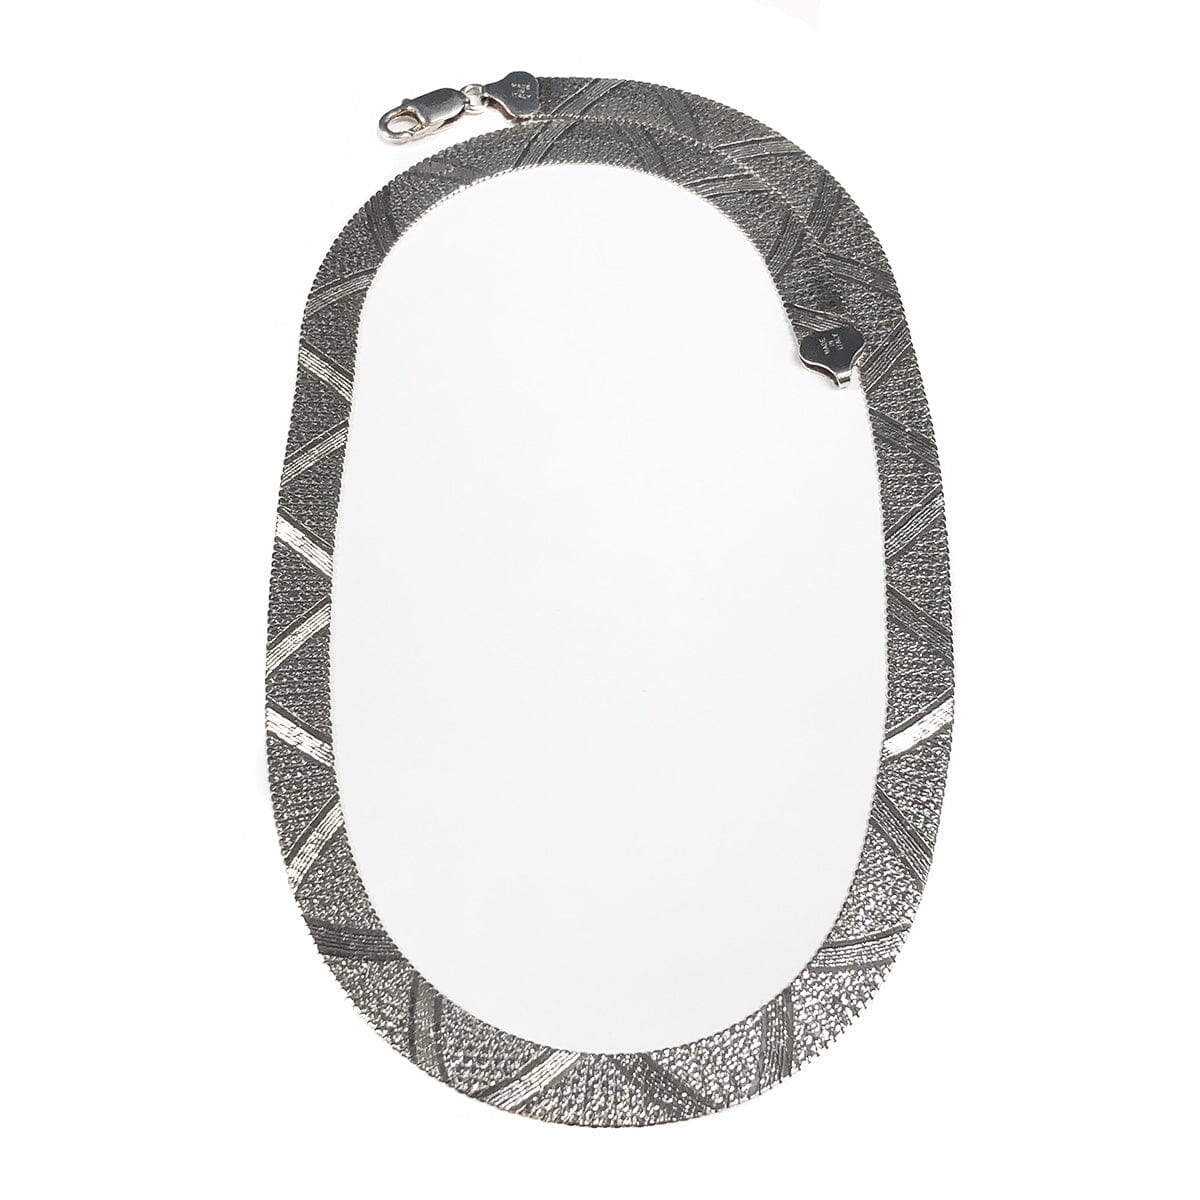 Great Lakes Boutique Silver Herringbone Necklace